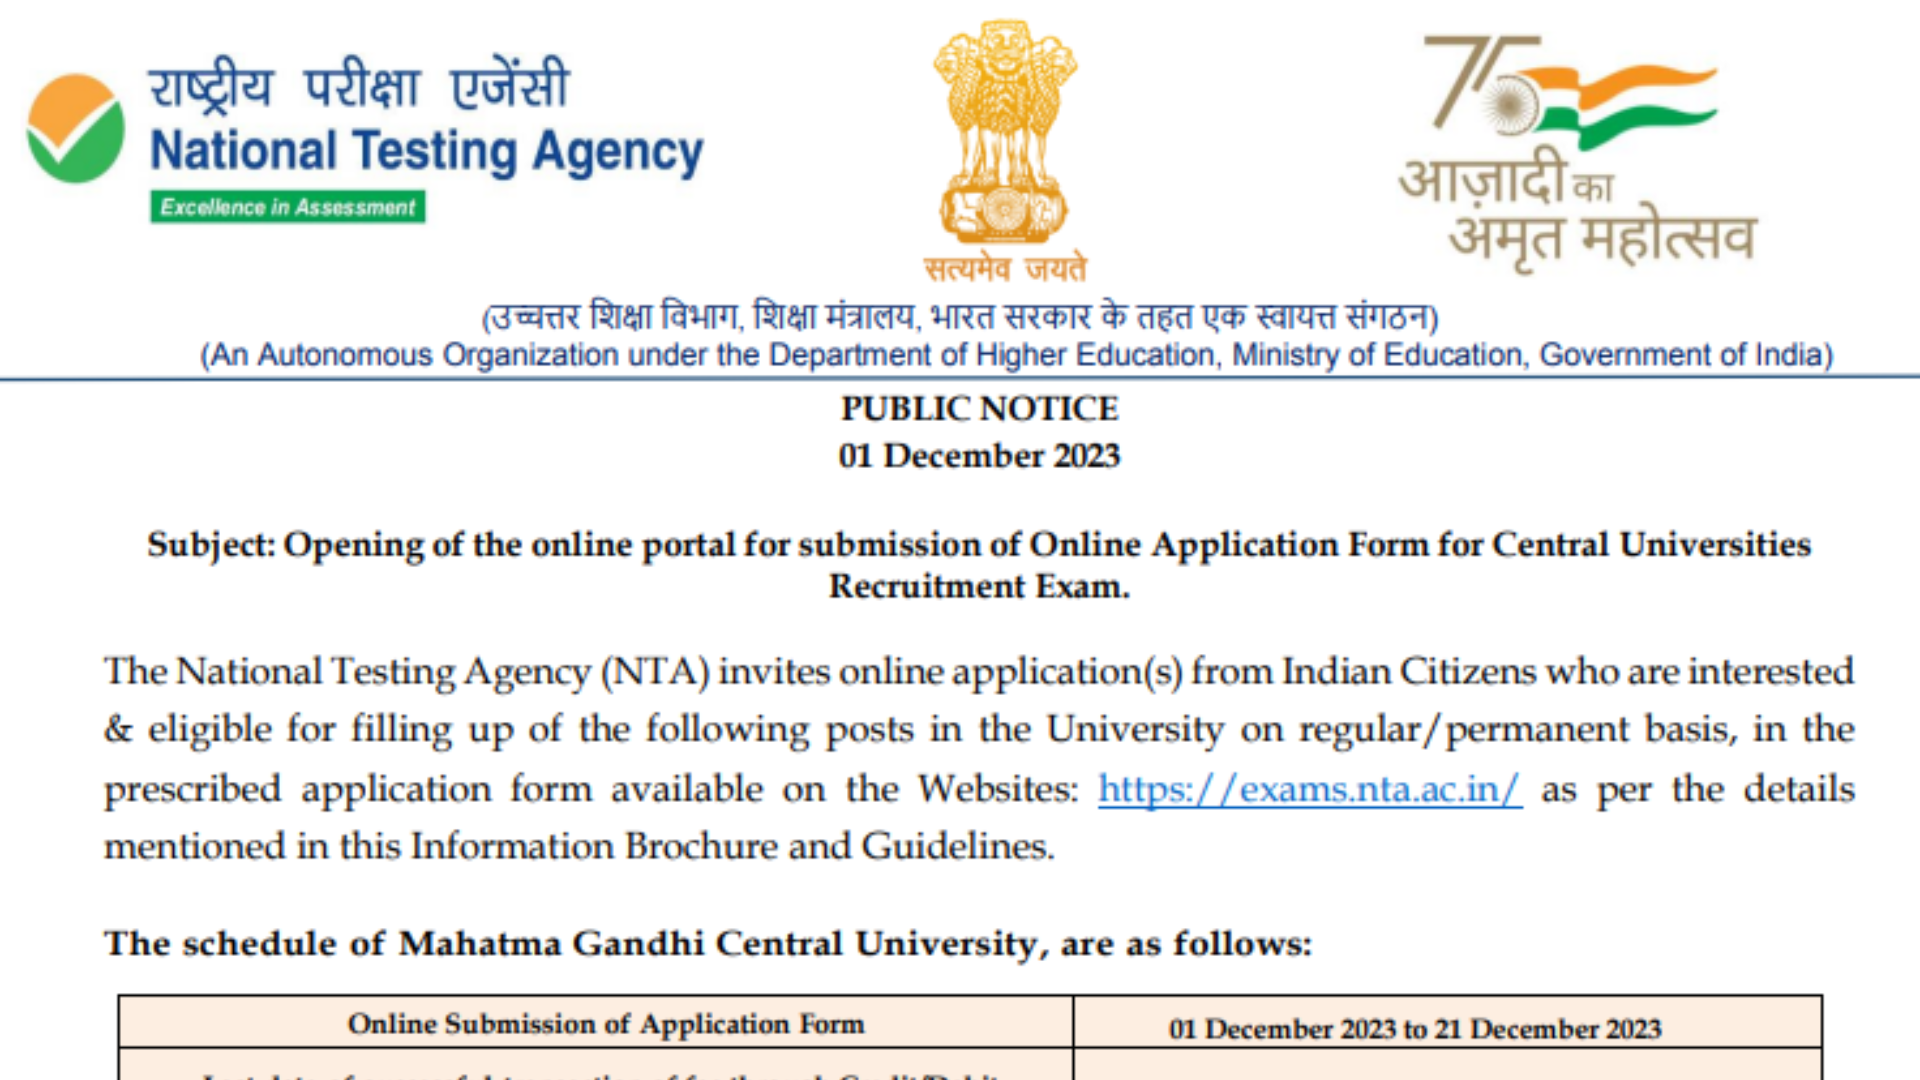 CUREC 2023 Central Universities Recruitment Exam Notification and Online Application Form